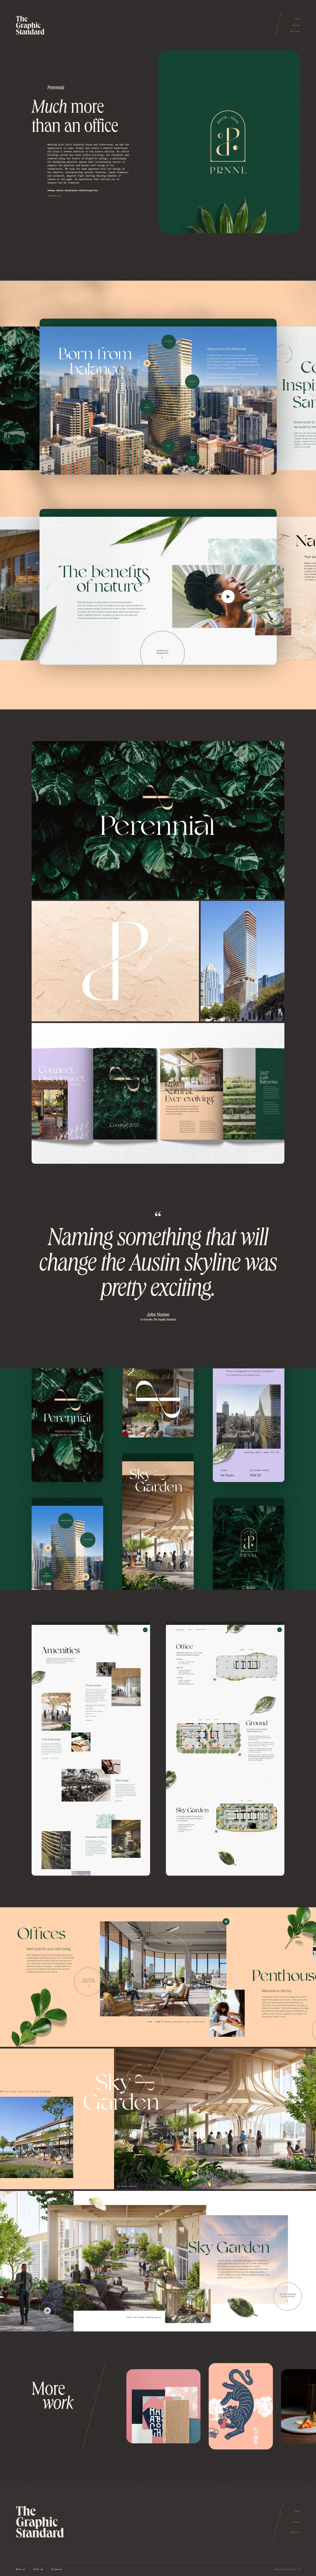 The Graphic Standard Landing Page Example: The Graphic Standard is an award-winning design studio specializing in bespoke branding and digital experiences that elevate brands and drive business.